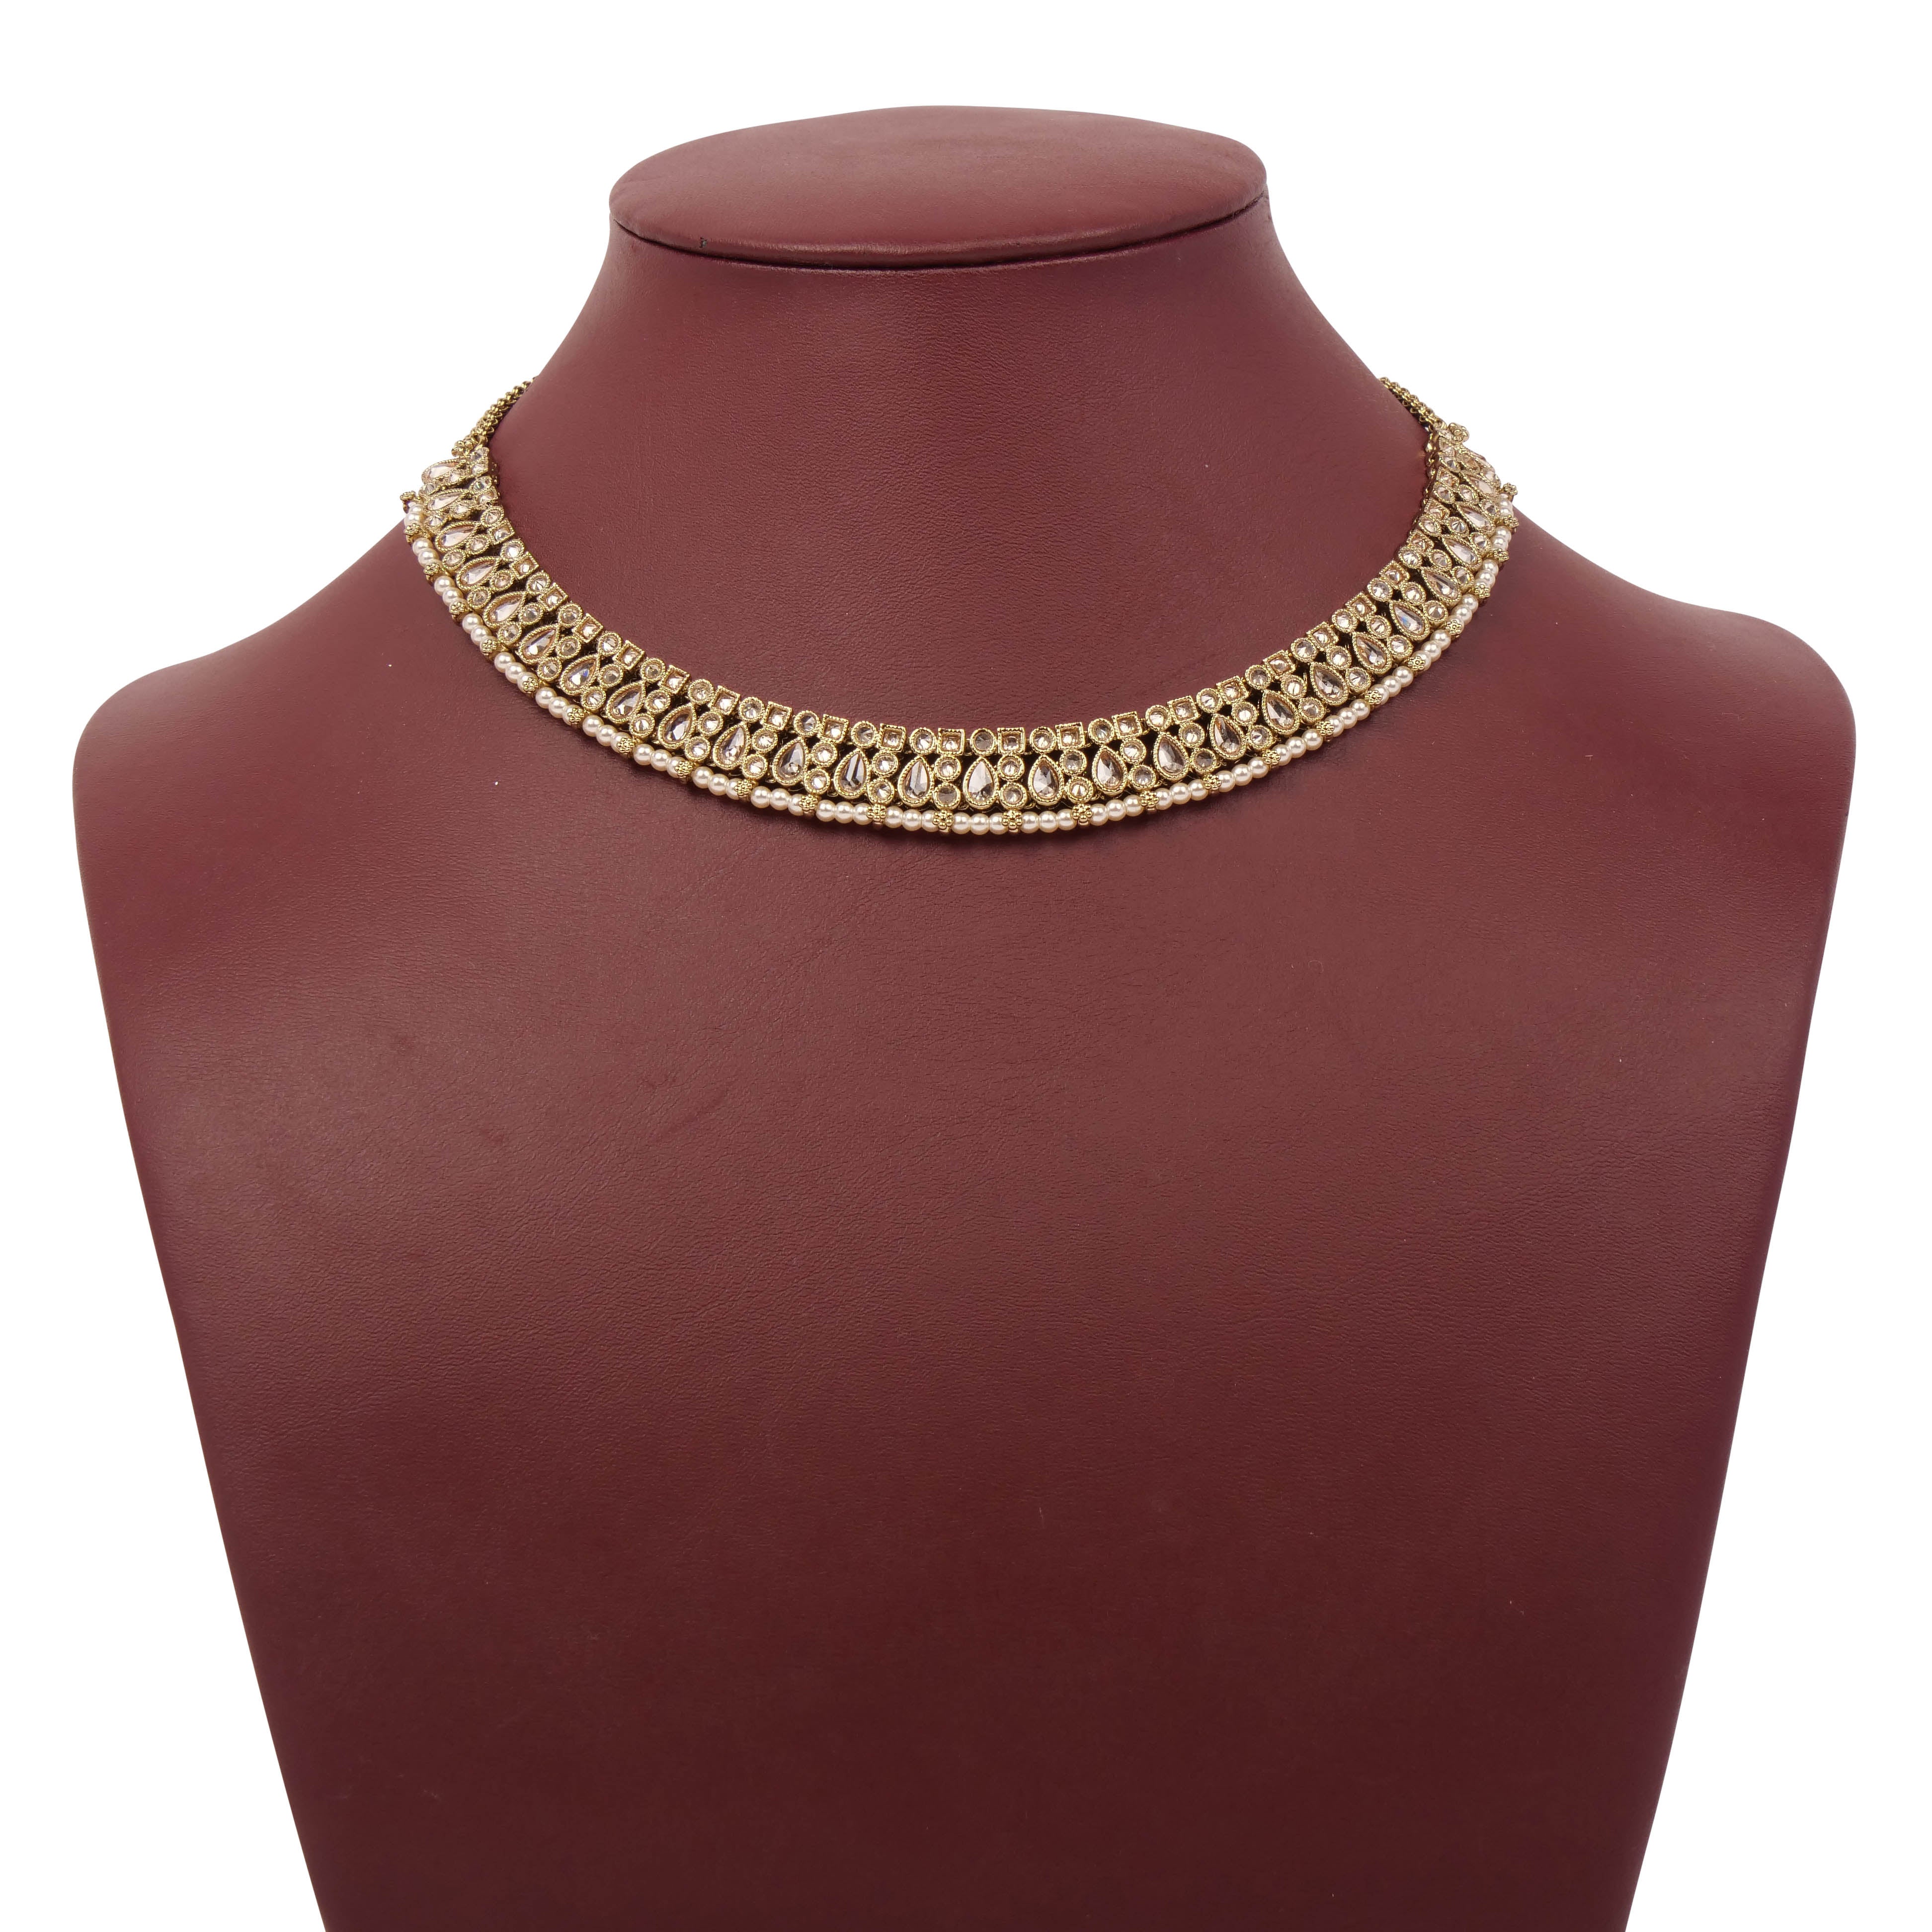 Naina Simple Necklace Set in Light Topaz